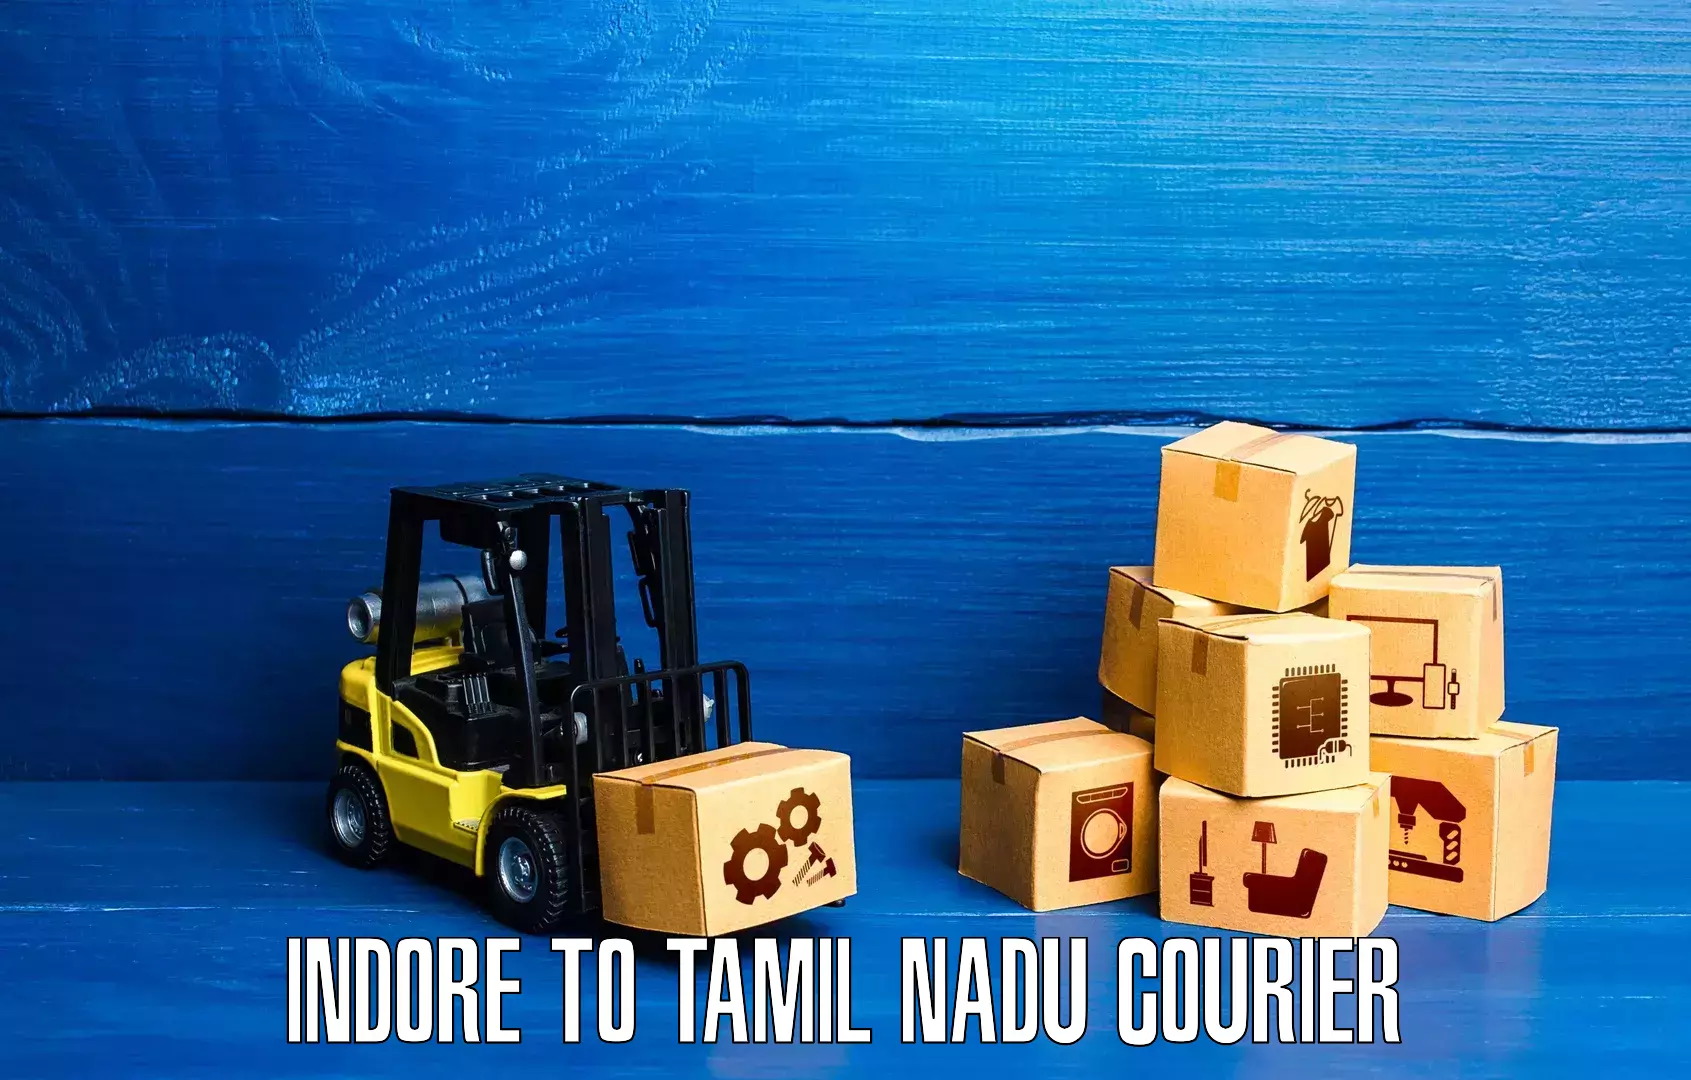 Cash on delivery service Indore to Tamil Nadu